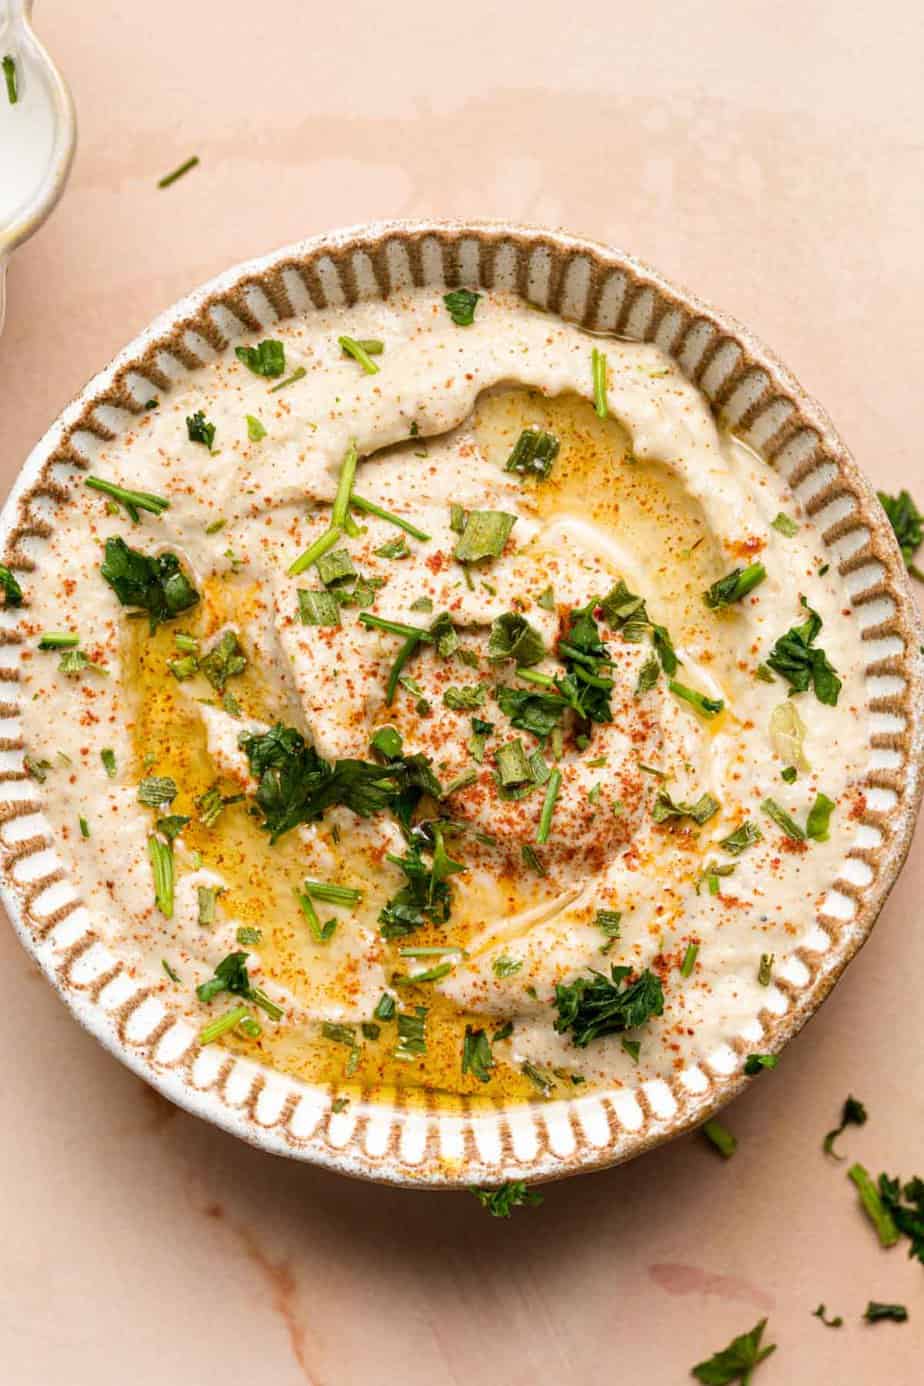 This Thermomix baba ganoush is a simple eggplant dip you NEED to try! It's healthy, packed with flavor & SO versatile. Truly irresistible! Dips for charcuterie boards.